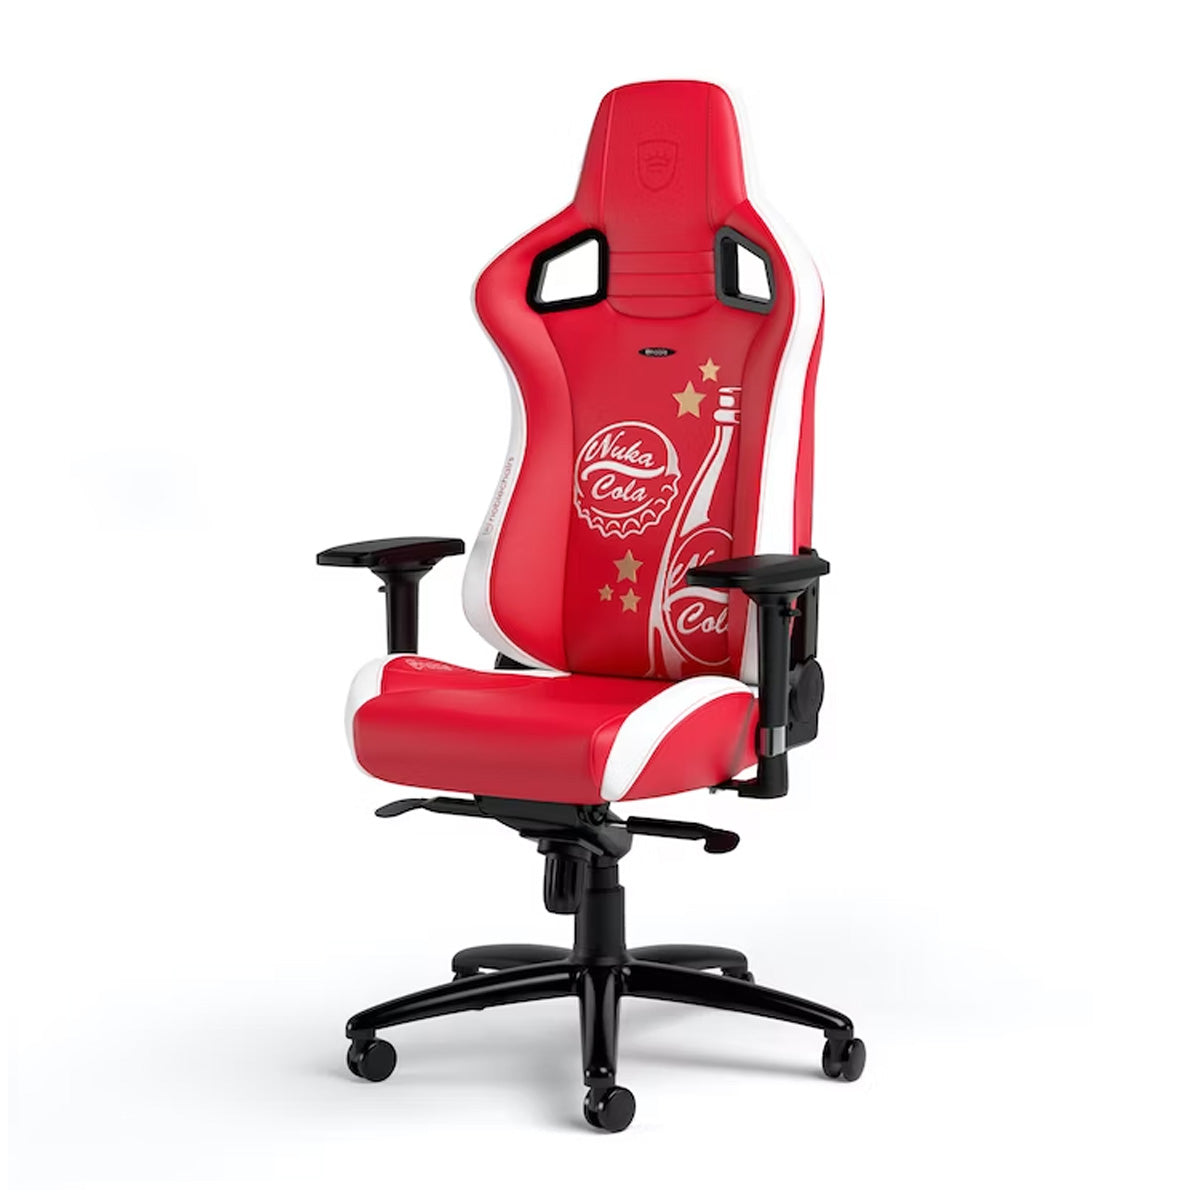 Noblechairs EPIC Series Faux Leather Gaming Chair - Nuka Cola